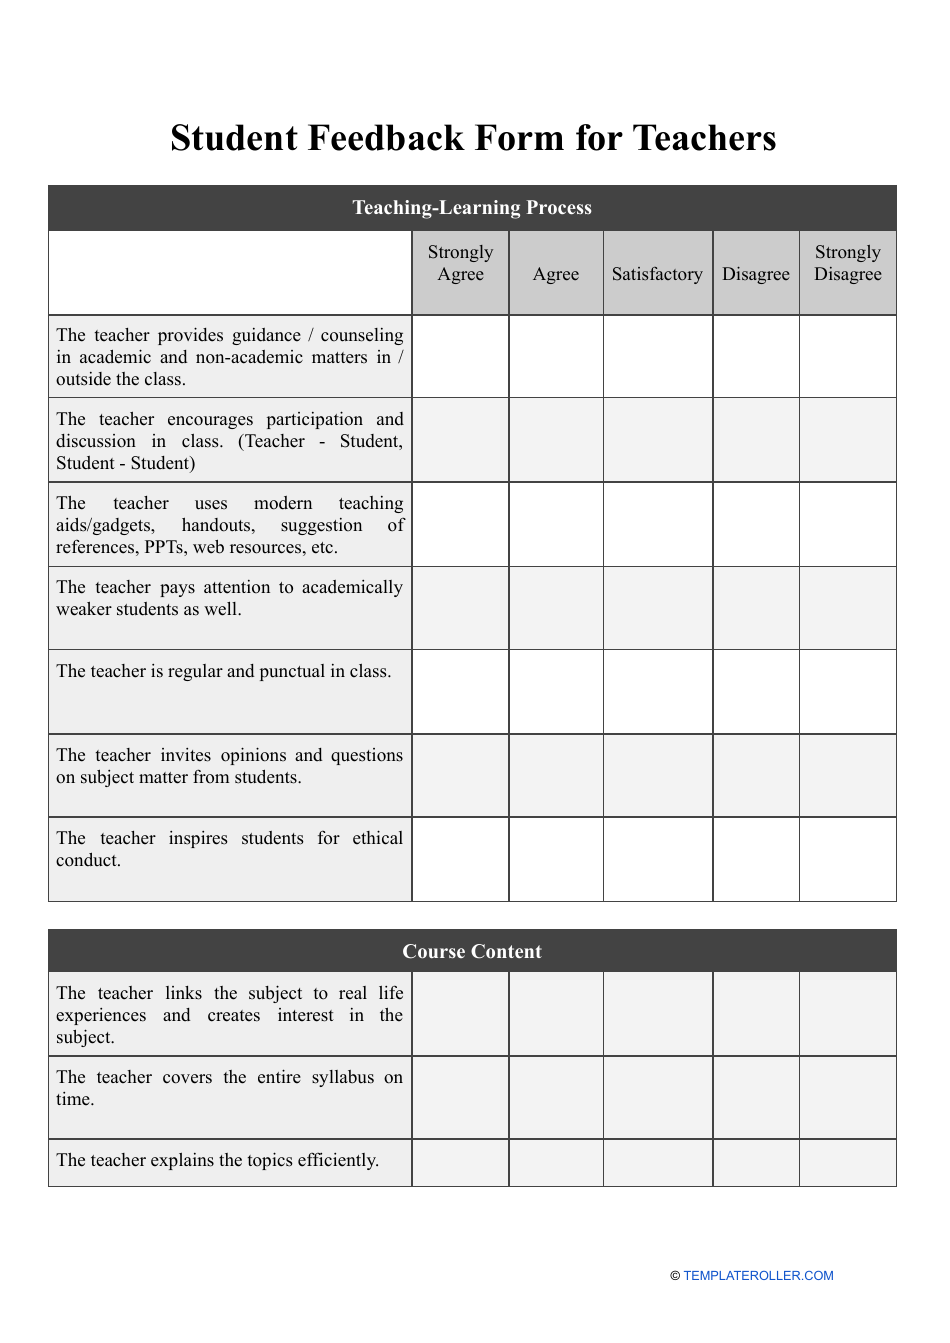 Student Feedback Form for Teachers, Page 1